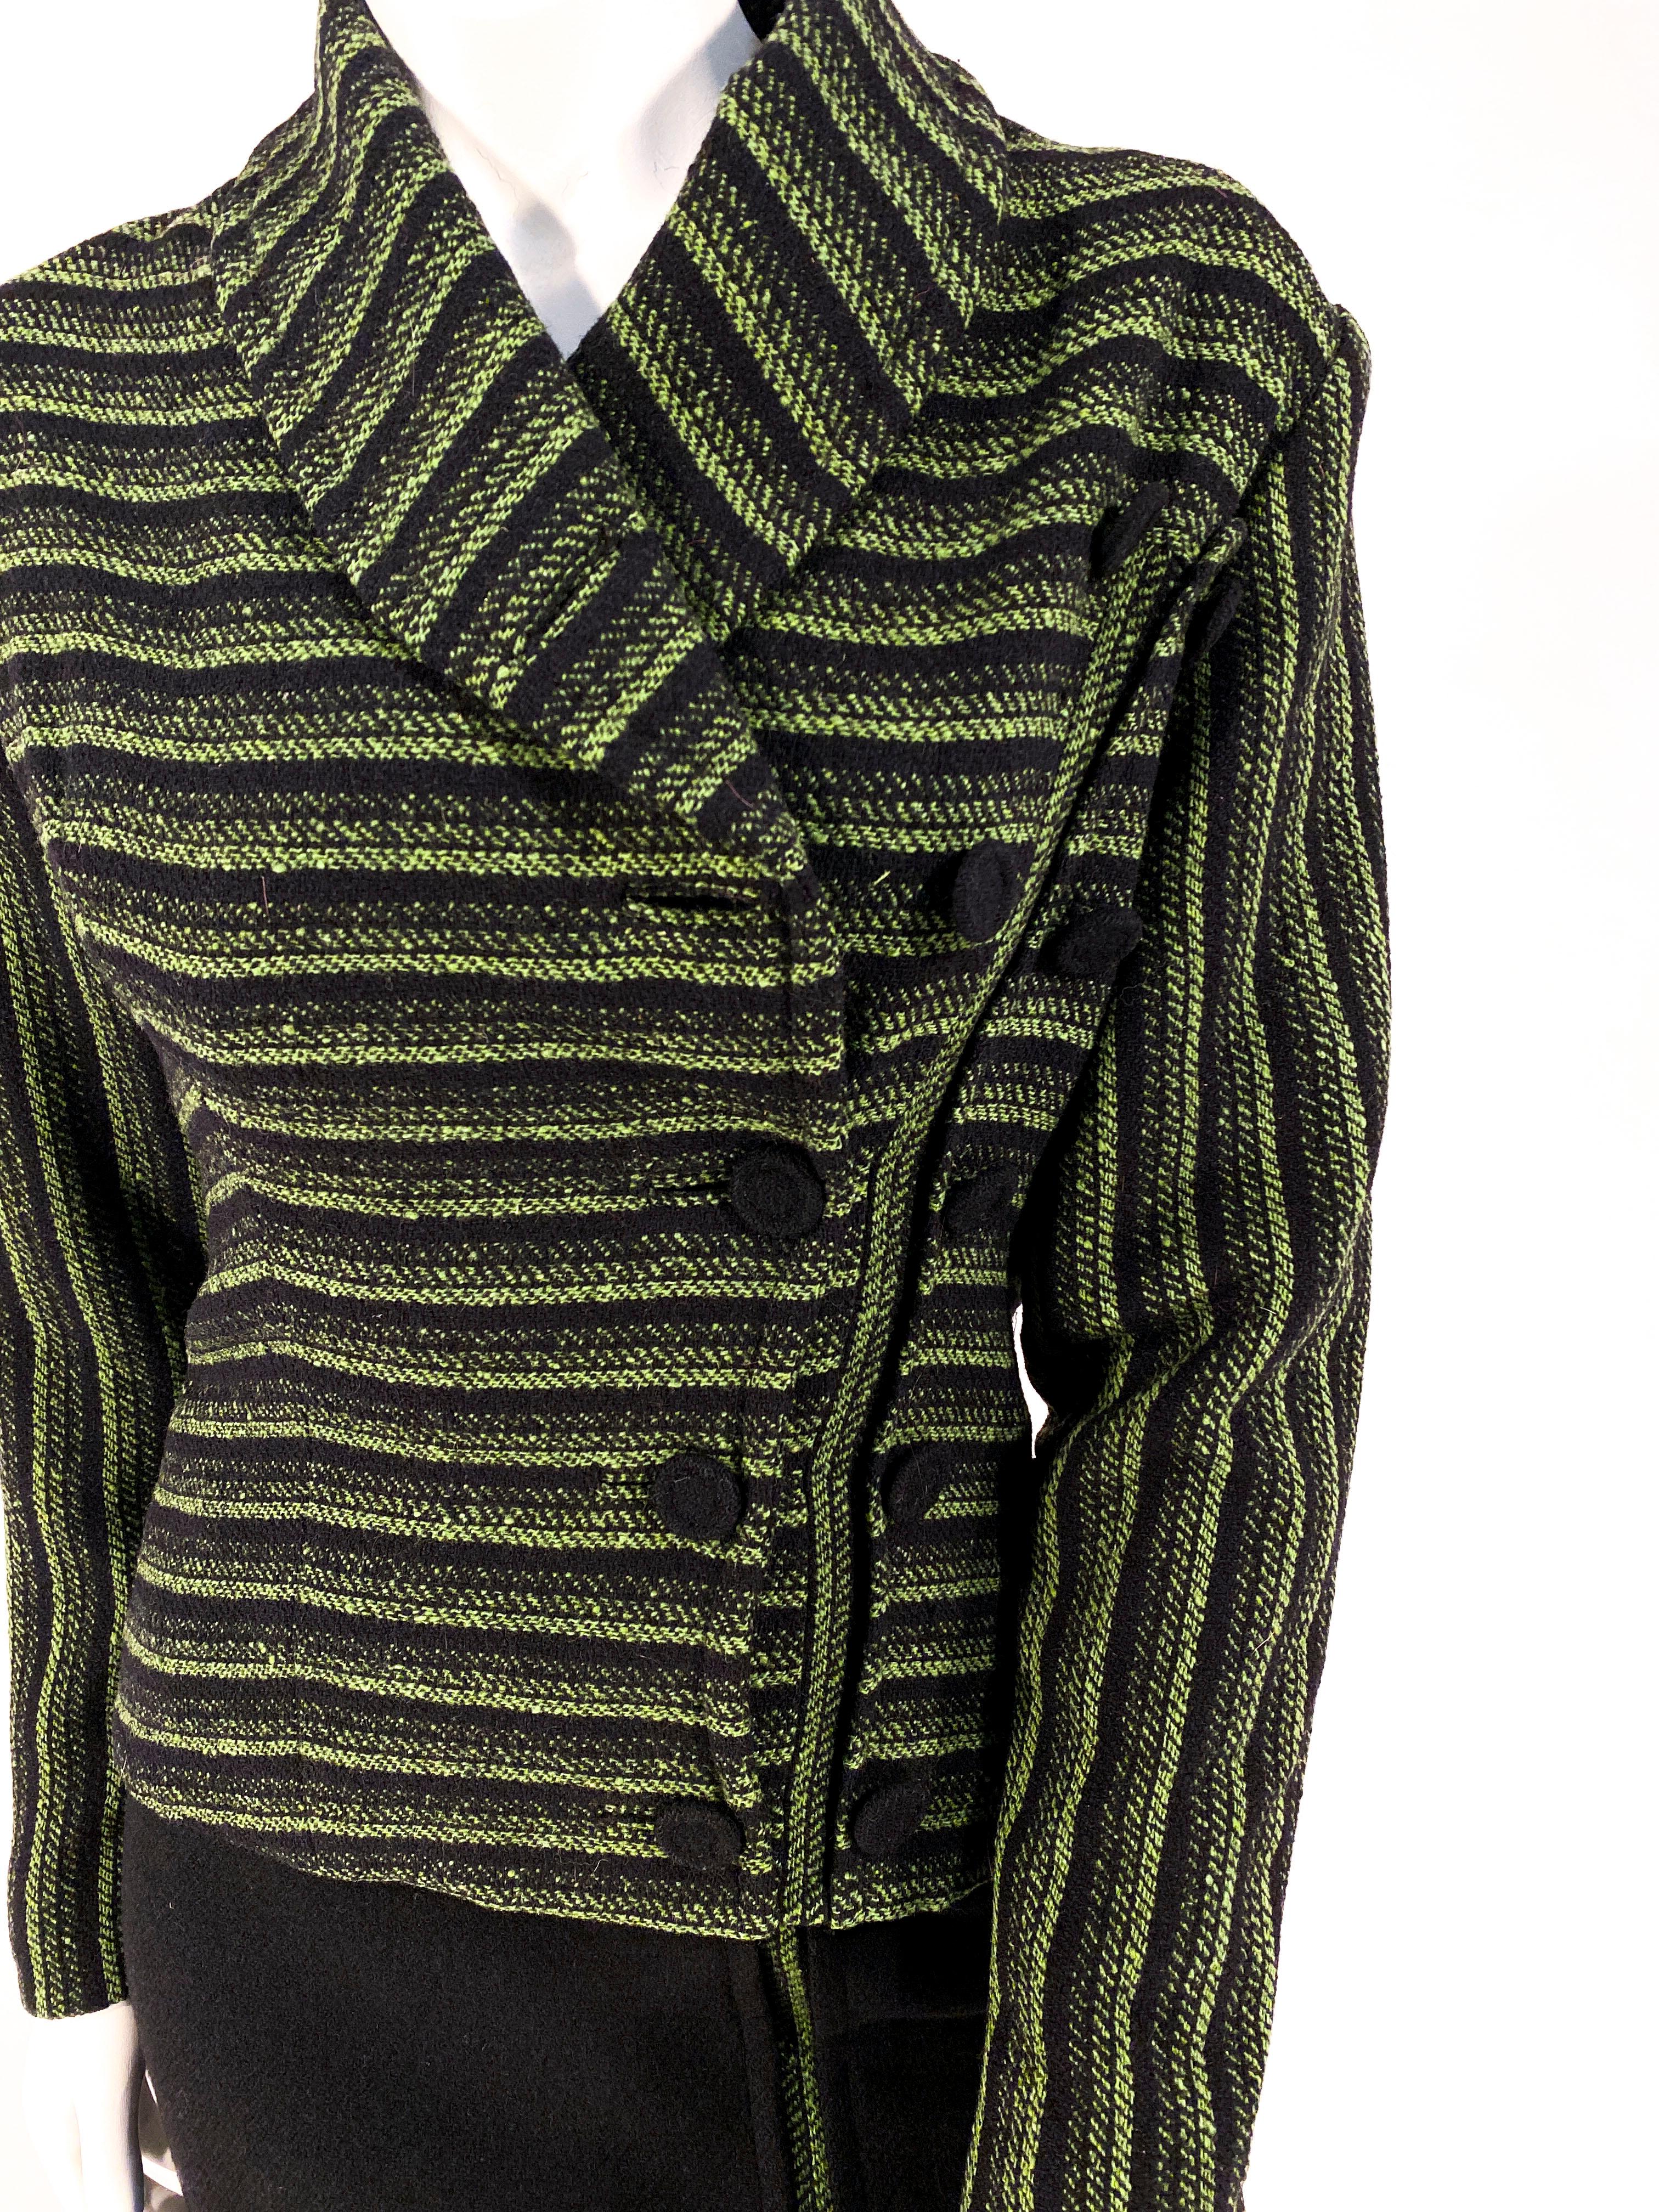 1950s Green and Black Wool Suit For Sale 2